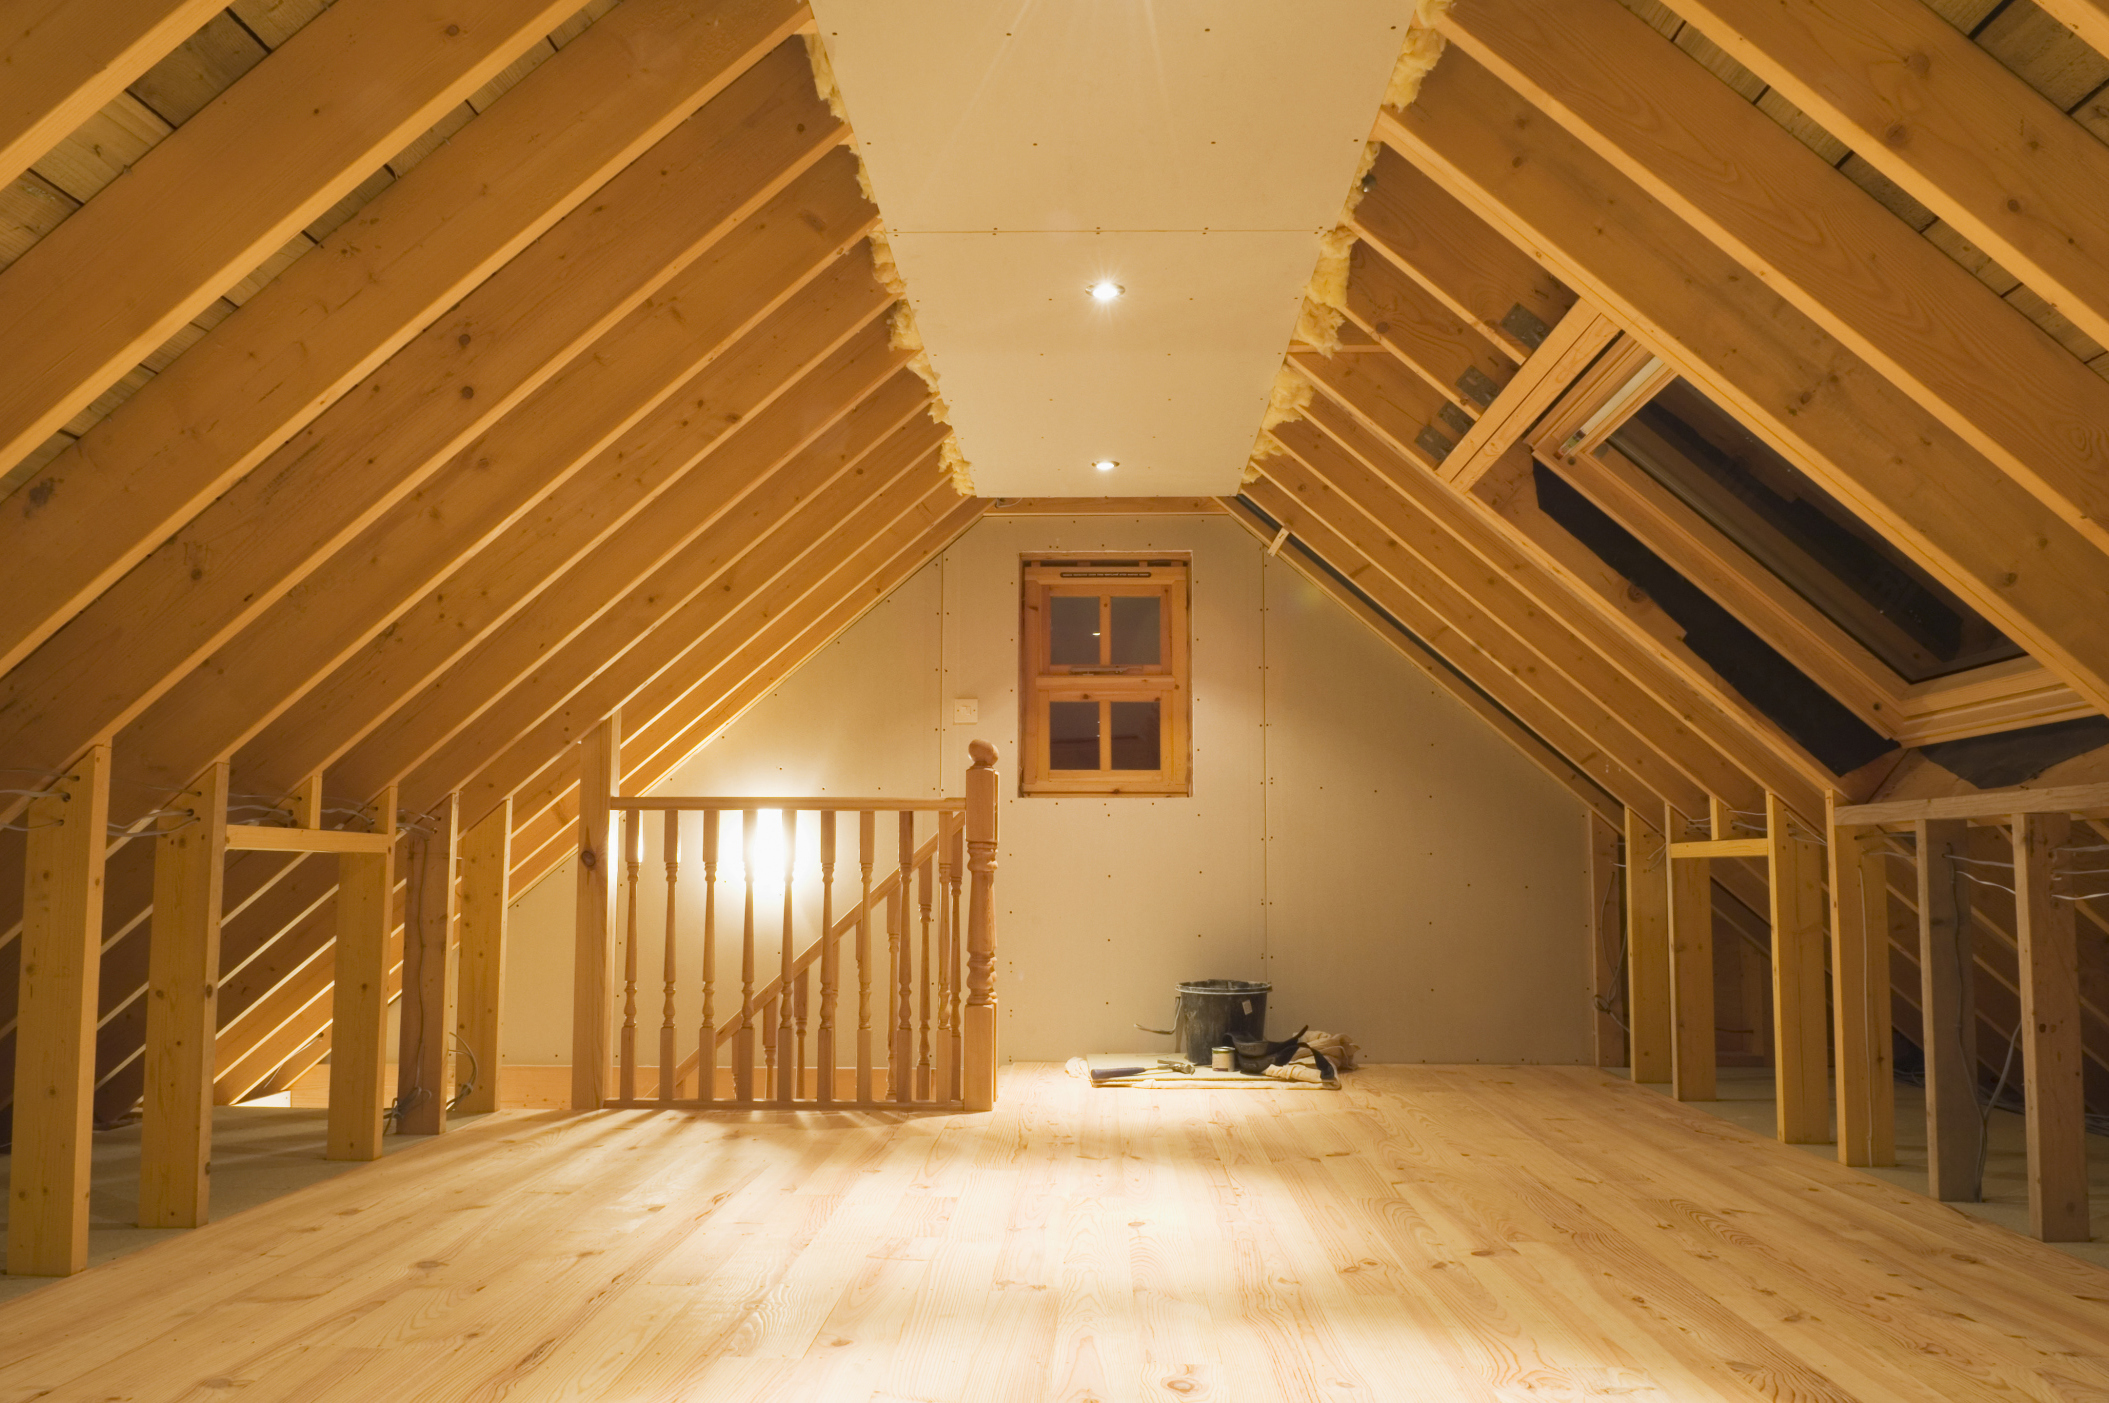 Project Management Services - Convert your unused attic space into extra floor area - Niagara Region